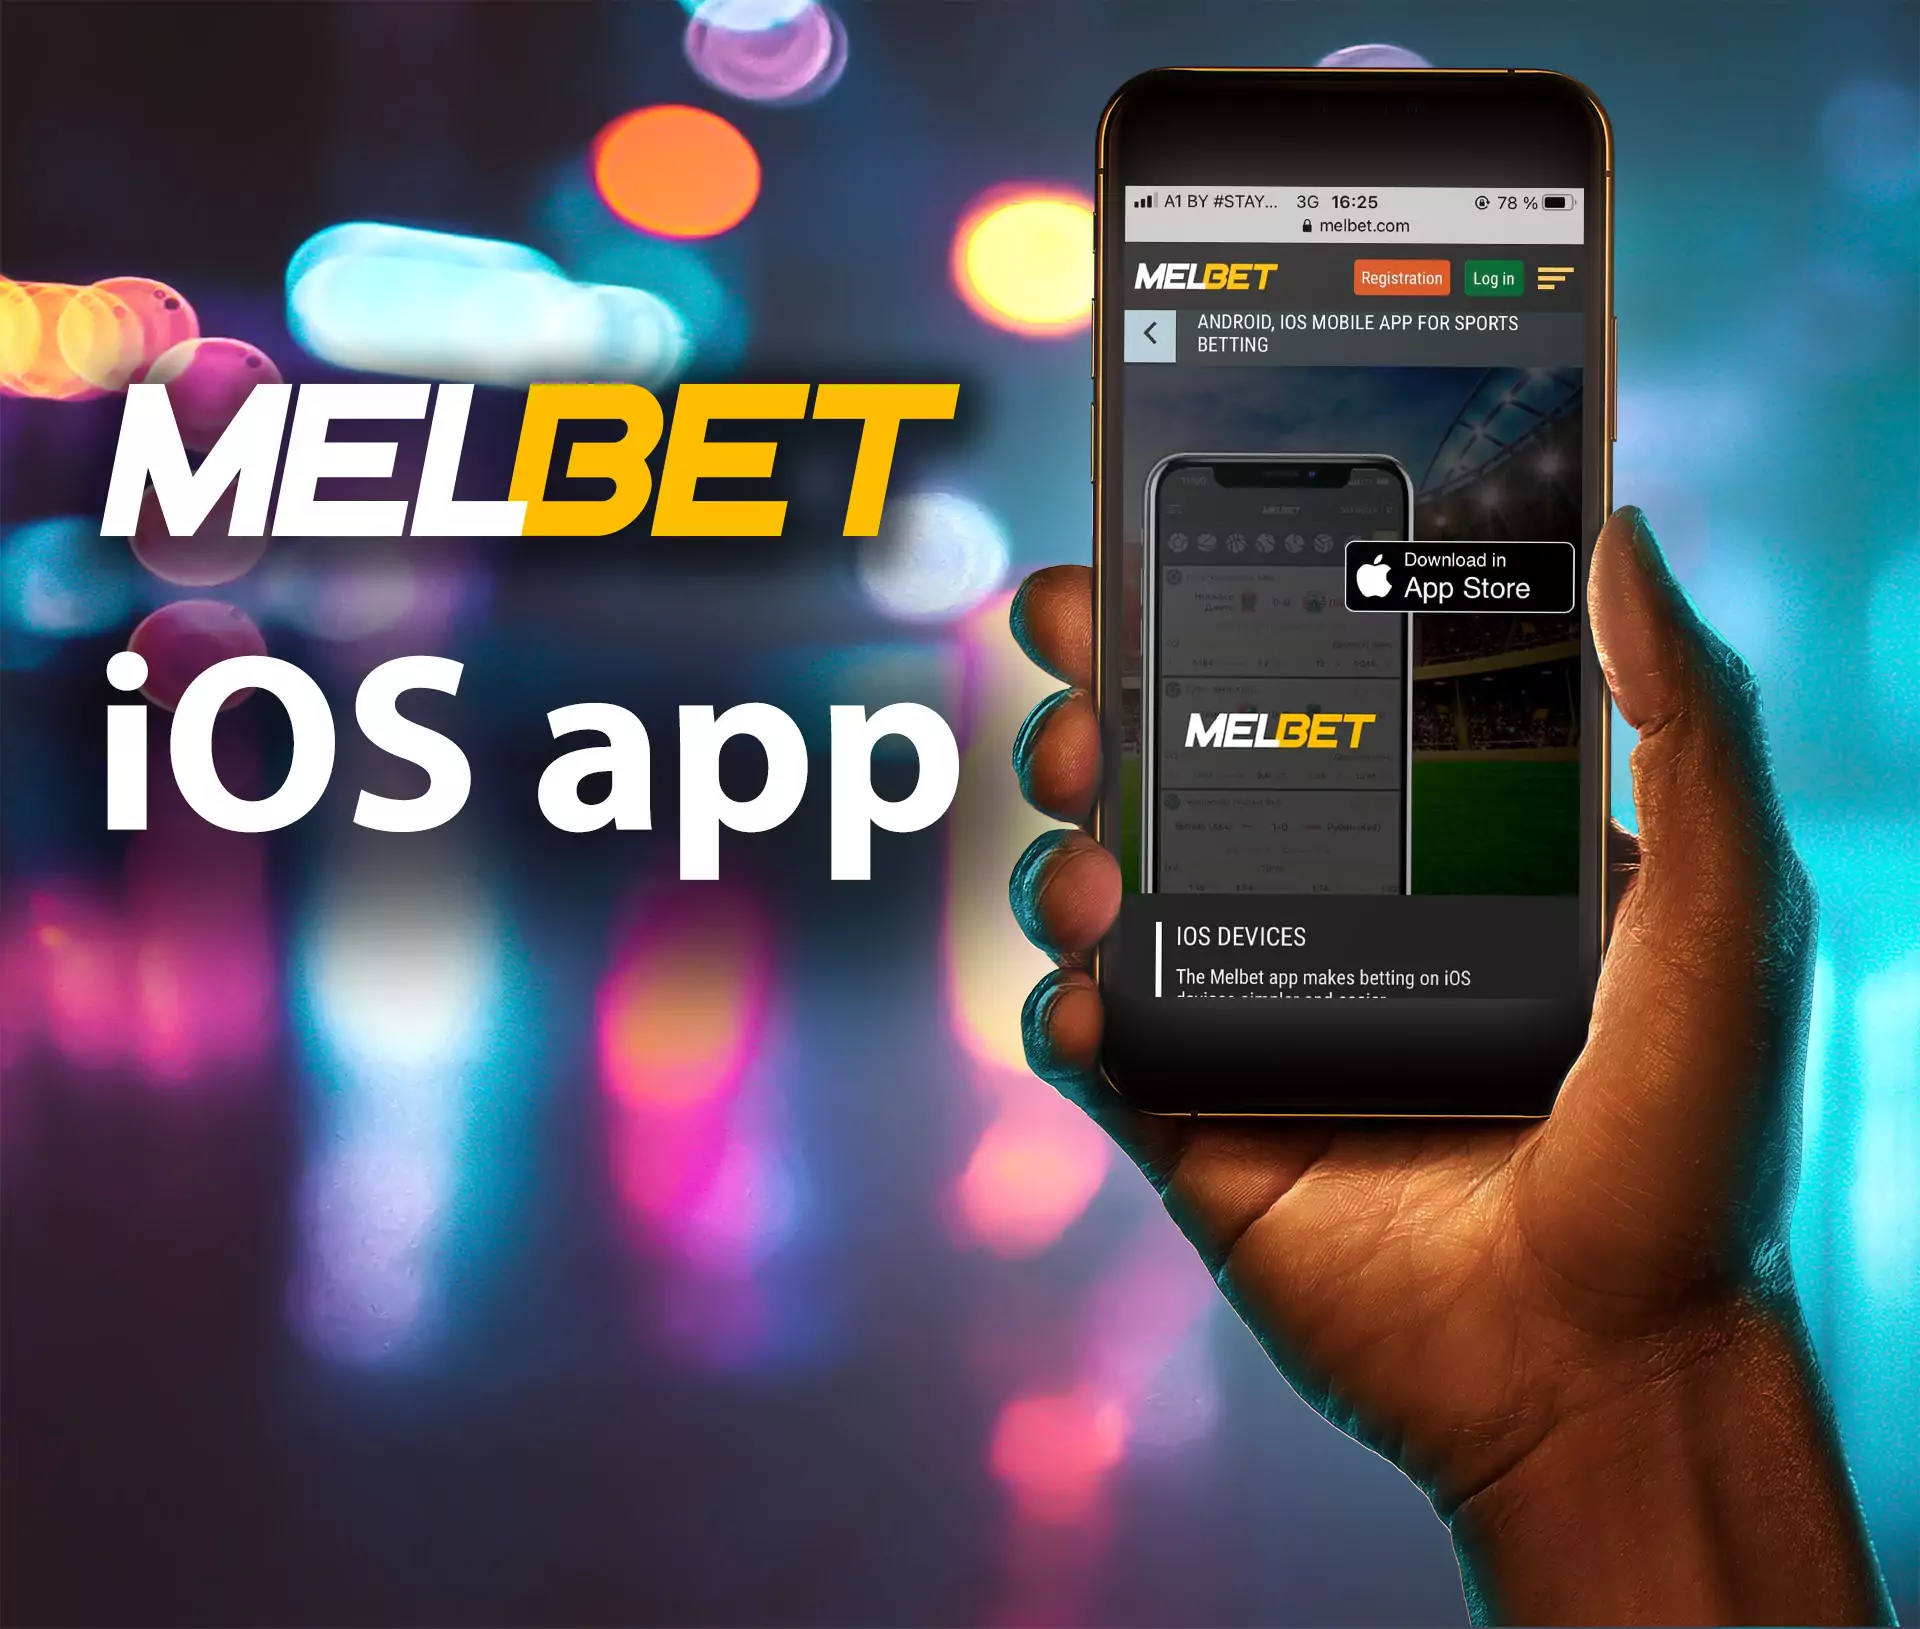 You can also install the Melbet app on your iPhone or iPad.